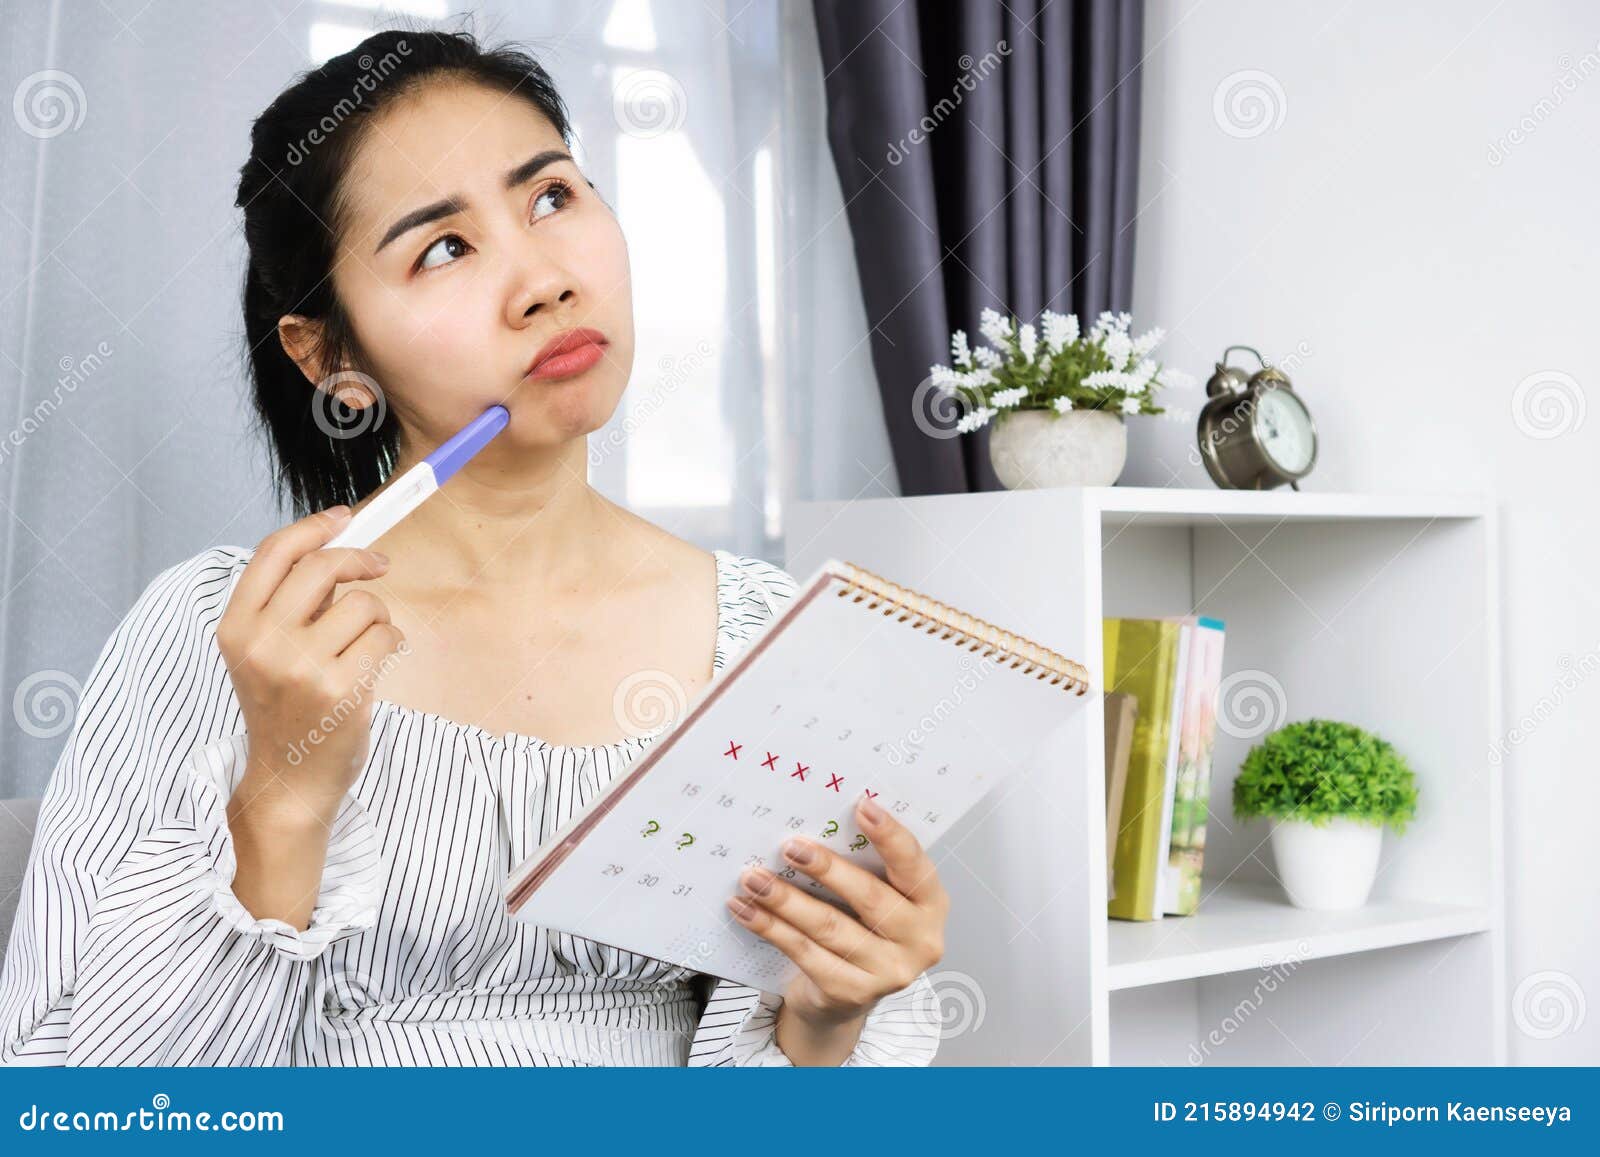 asian woman hand holding calendar and pregnancy test counting the date and checking her menstrual cycle planning for ovulation